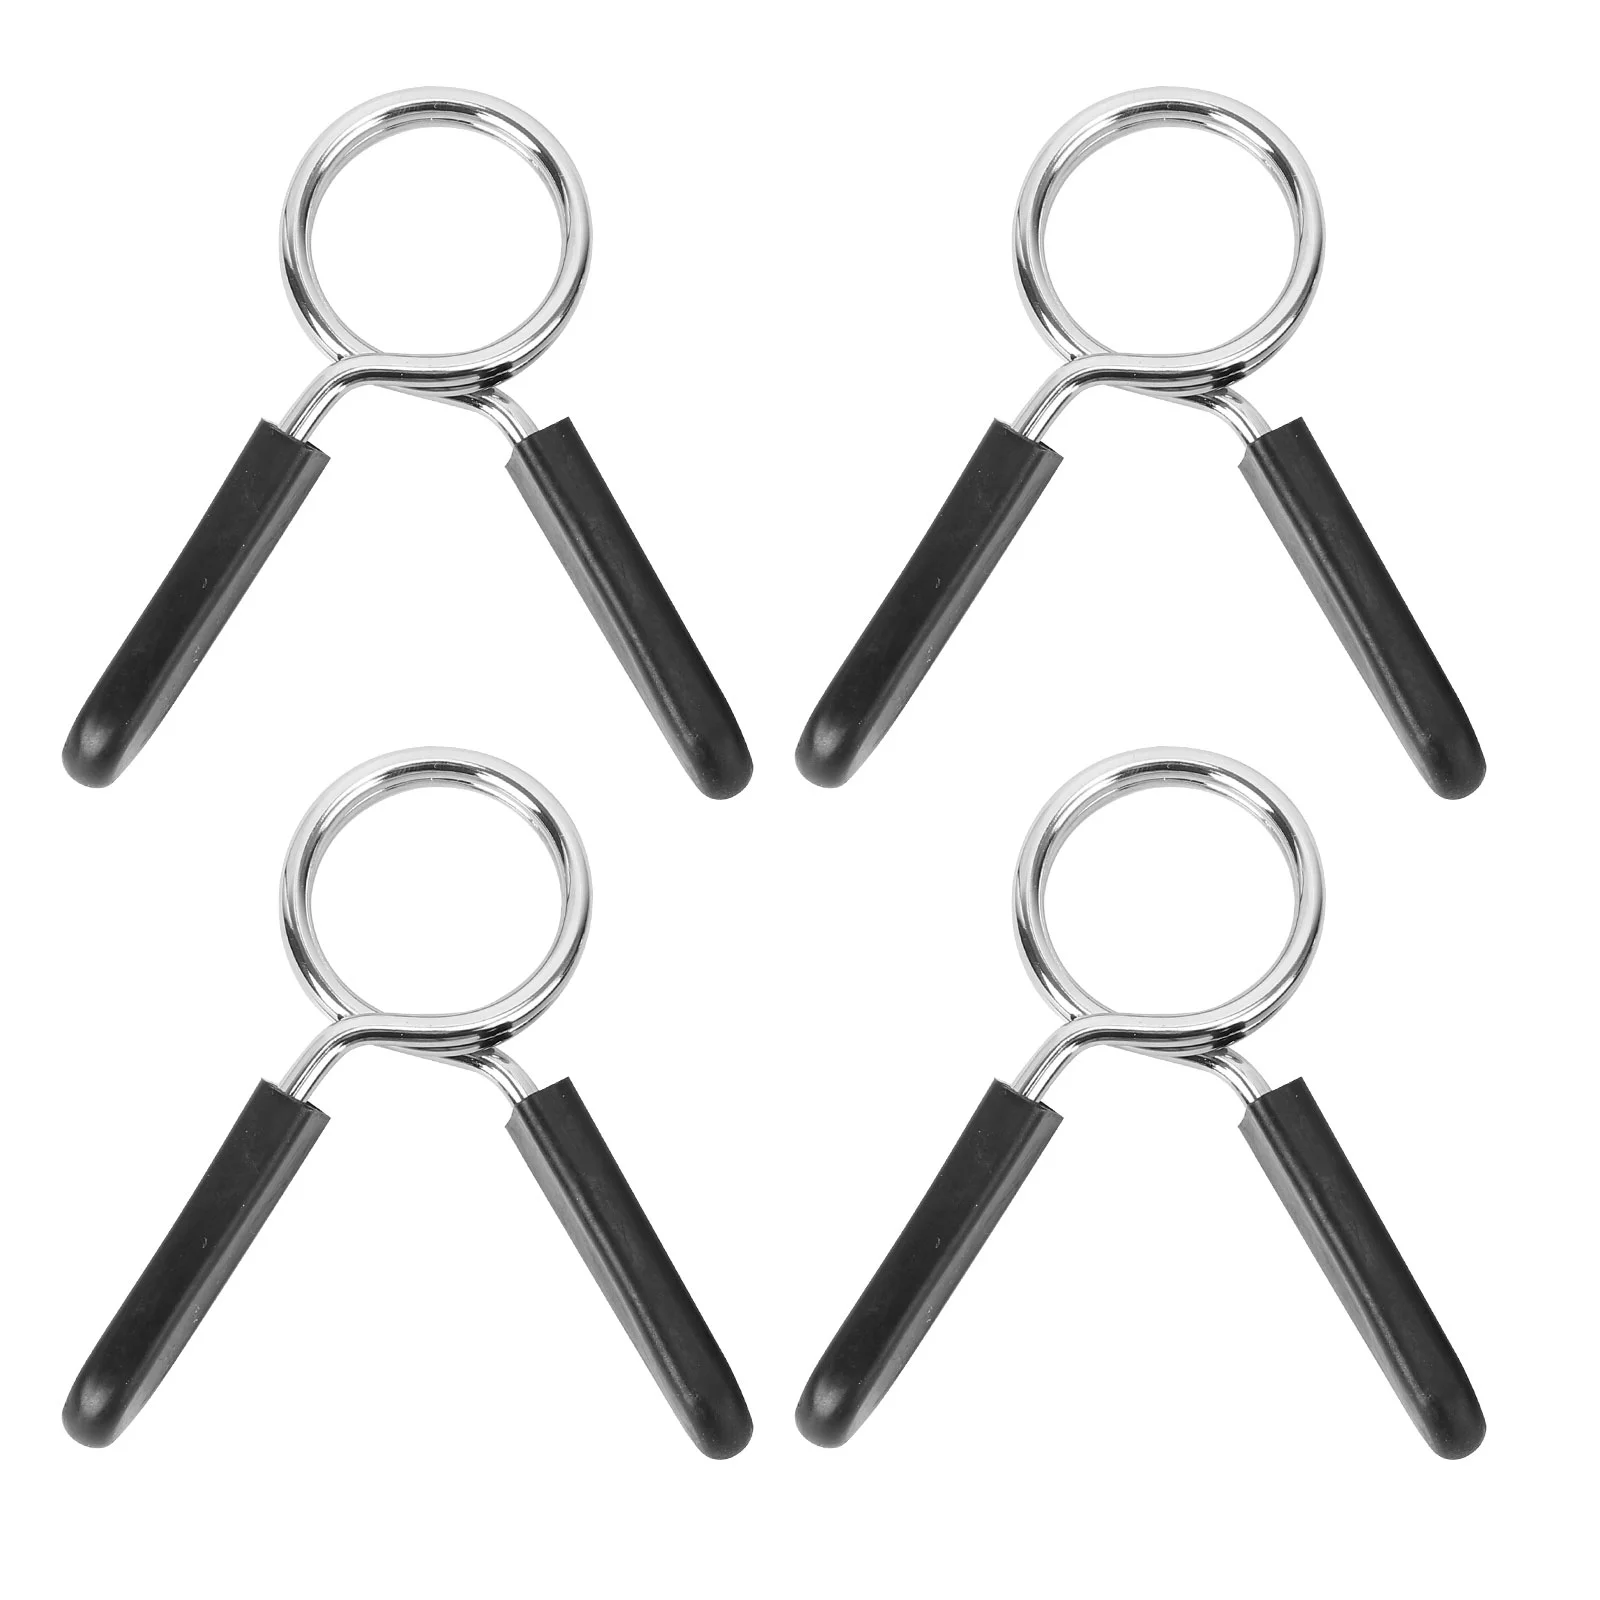 

4pcs Dumbbell Spring Collars, Barbell Clamps with Rubber Grip Handles Perfect for Weightlifting& Strength Training